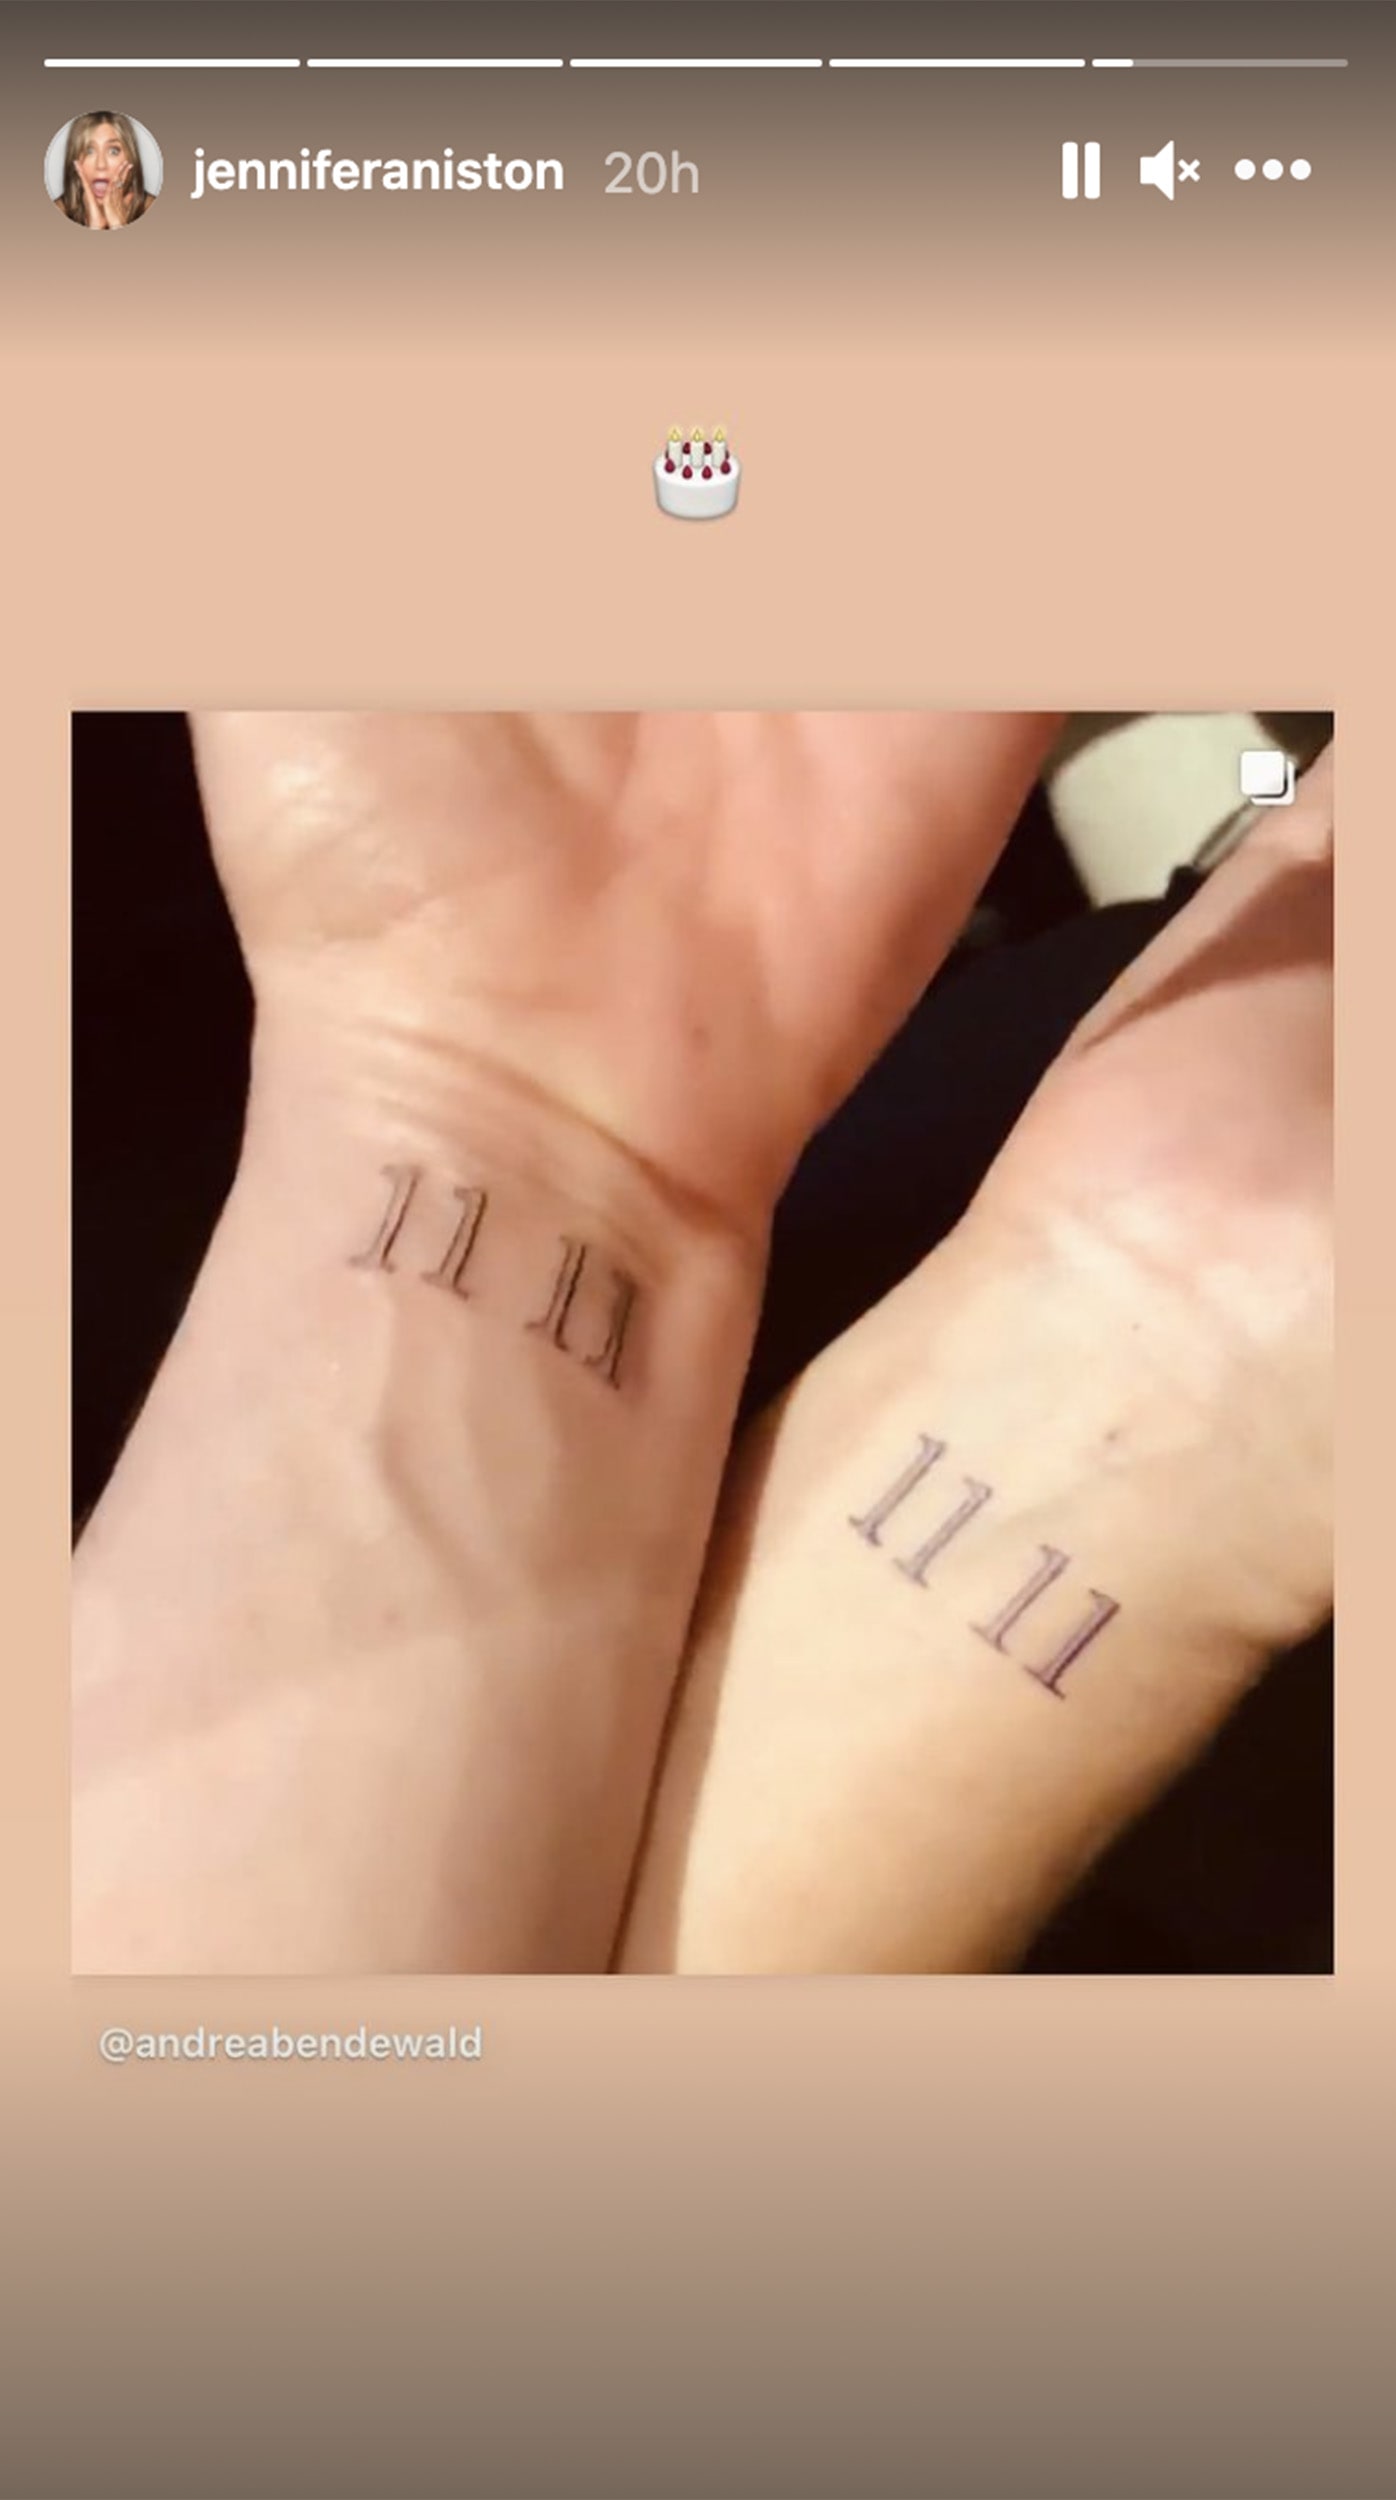 Jennifer Aniston reveals the significance behind her 11 11 tattoo